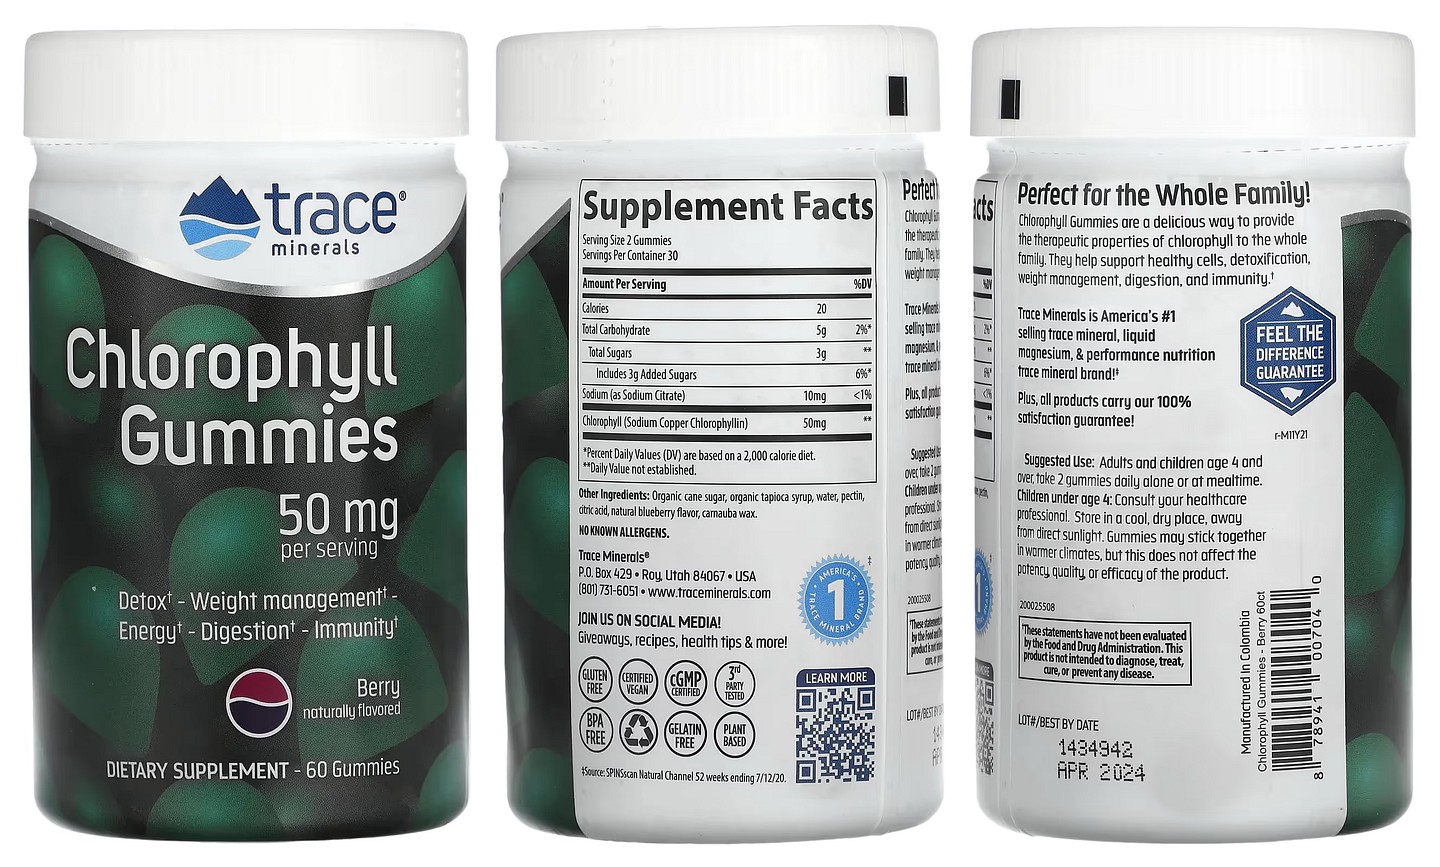 Trace Minerals, Chlorophyll Gummies packaging